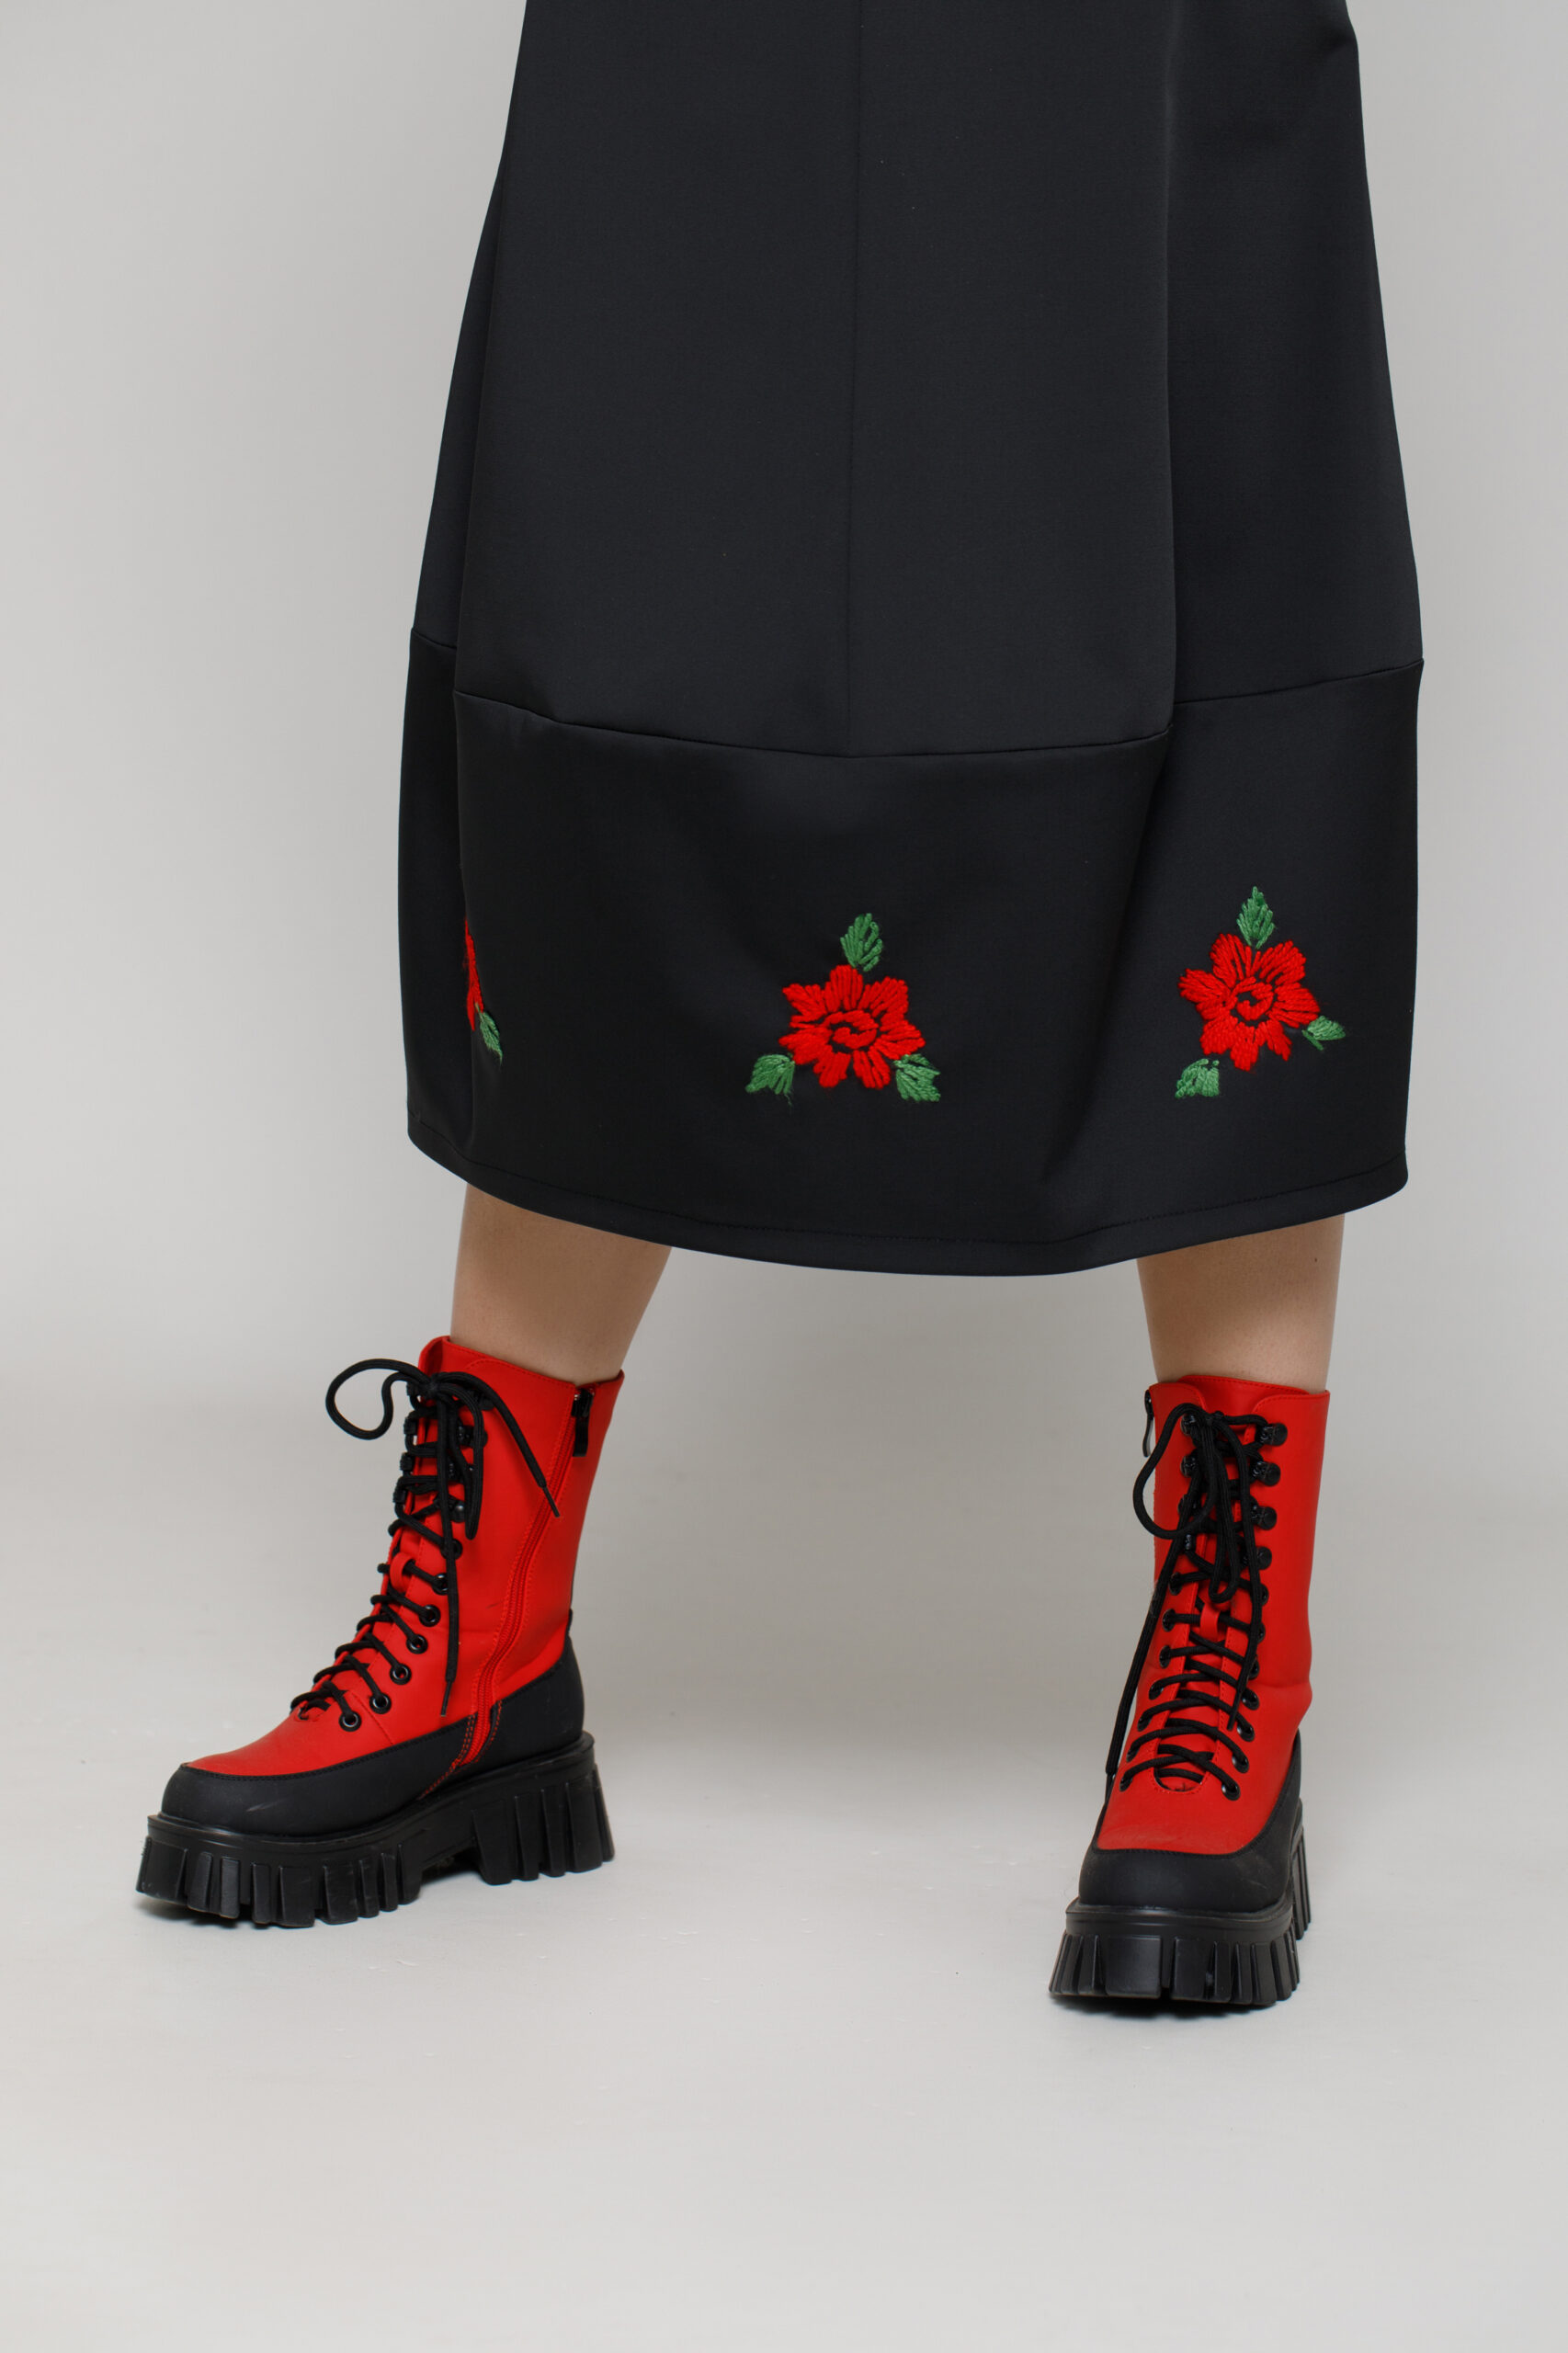 IMMA DRESS IN BLACK TERCOT WITH FLORAL EMBROIDERY. Natural fabrics, original design, handmade embroidery